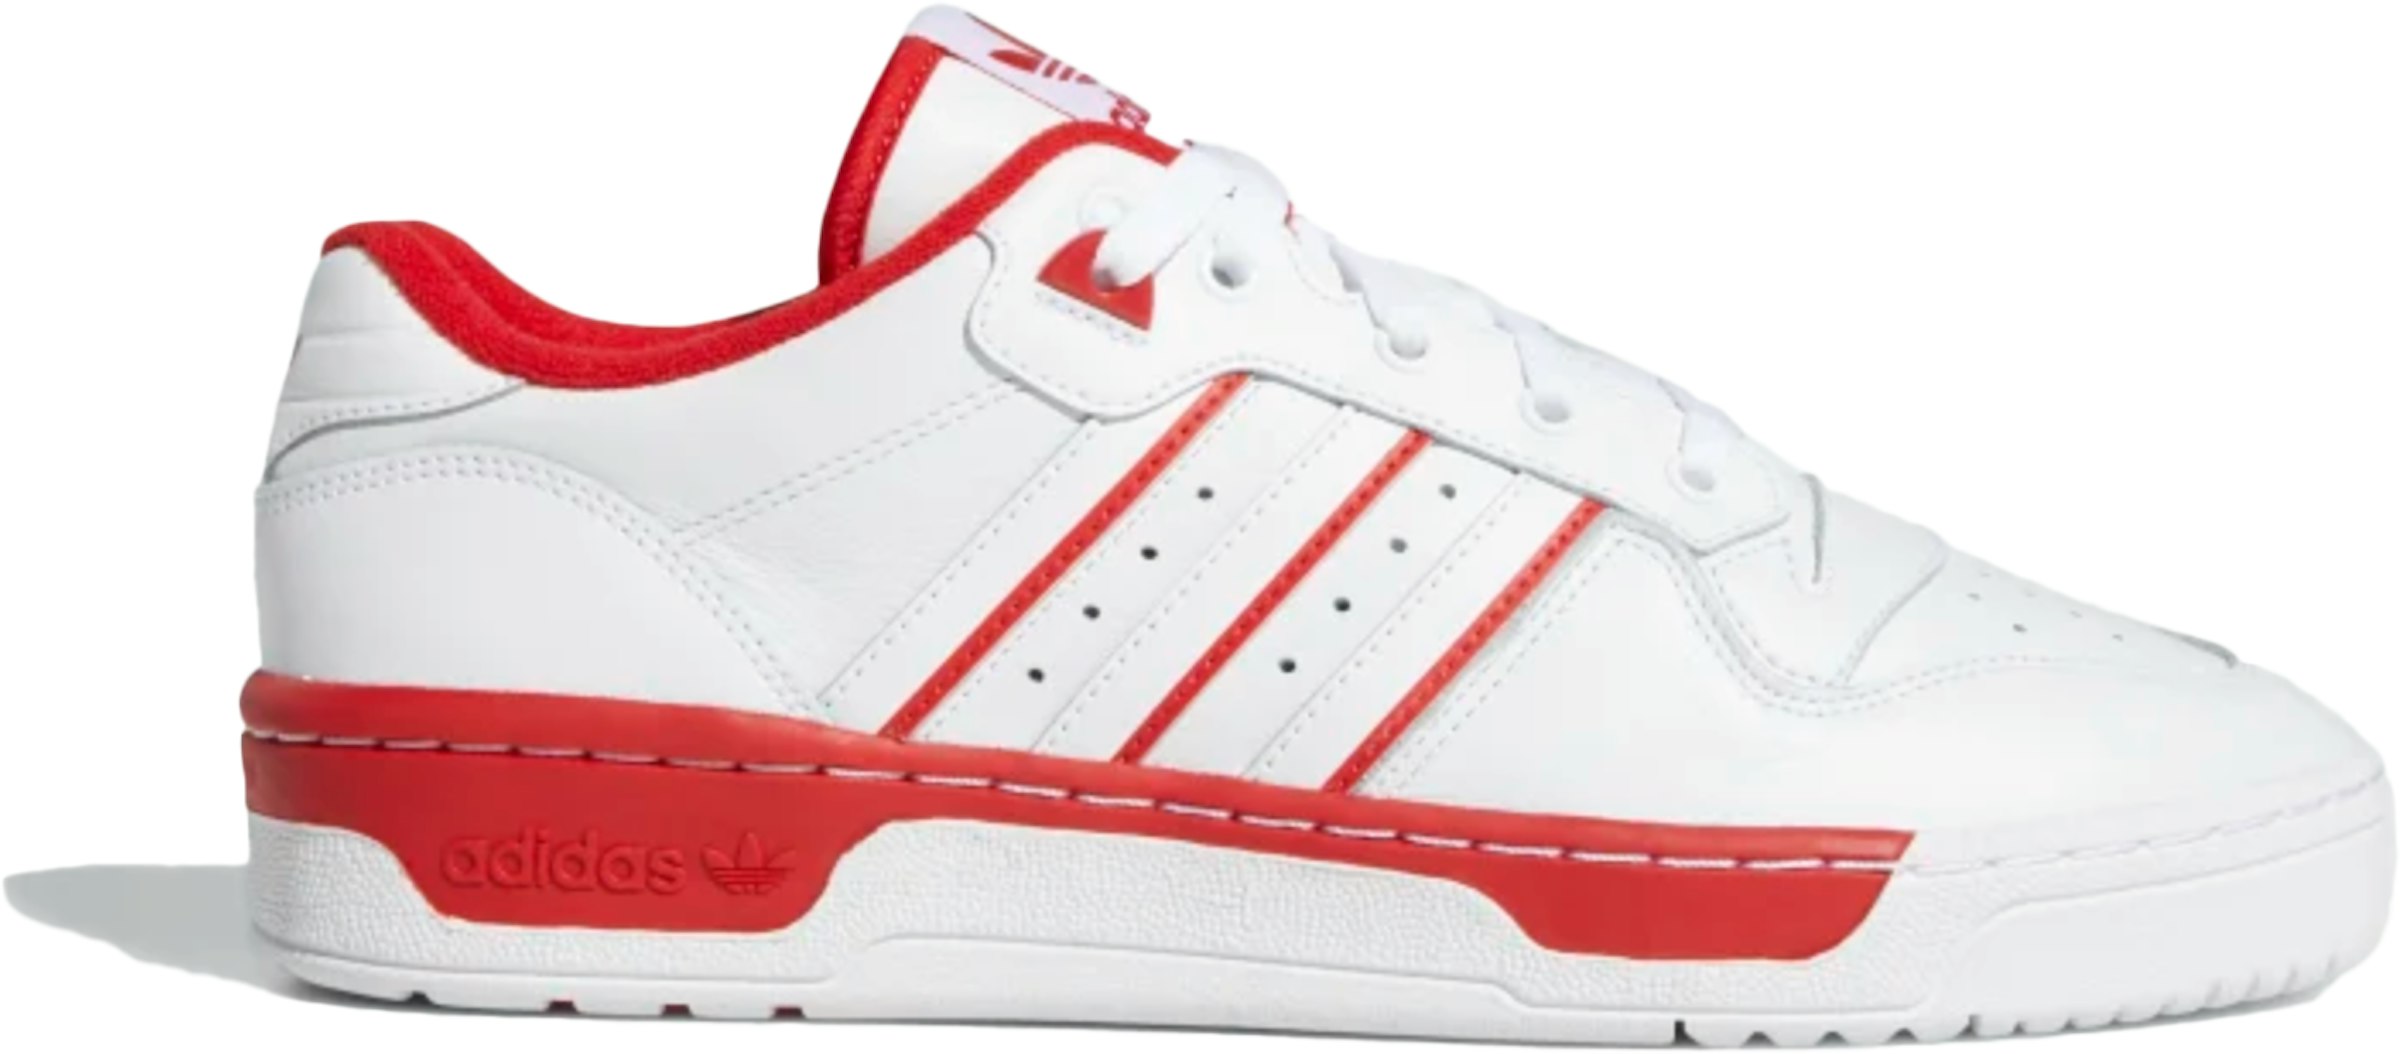 adidas Rivalry Low Cloud White Men's - US